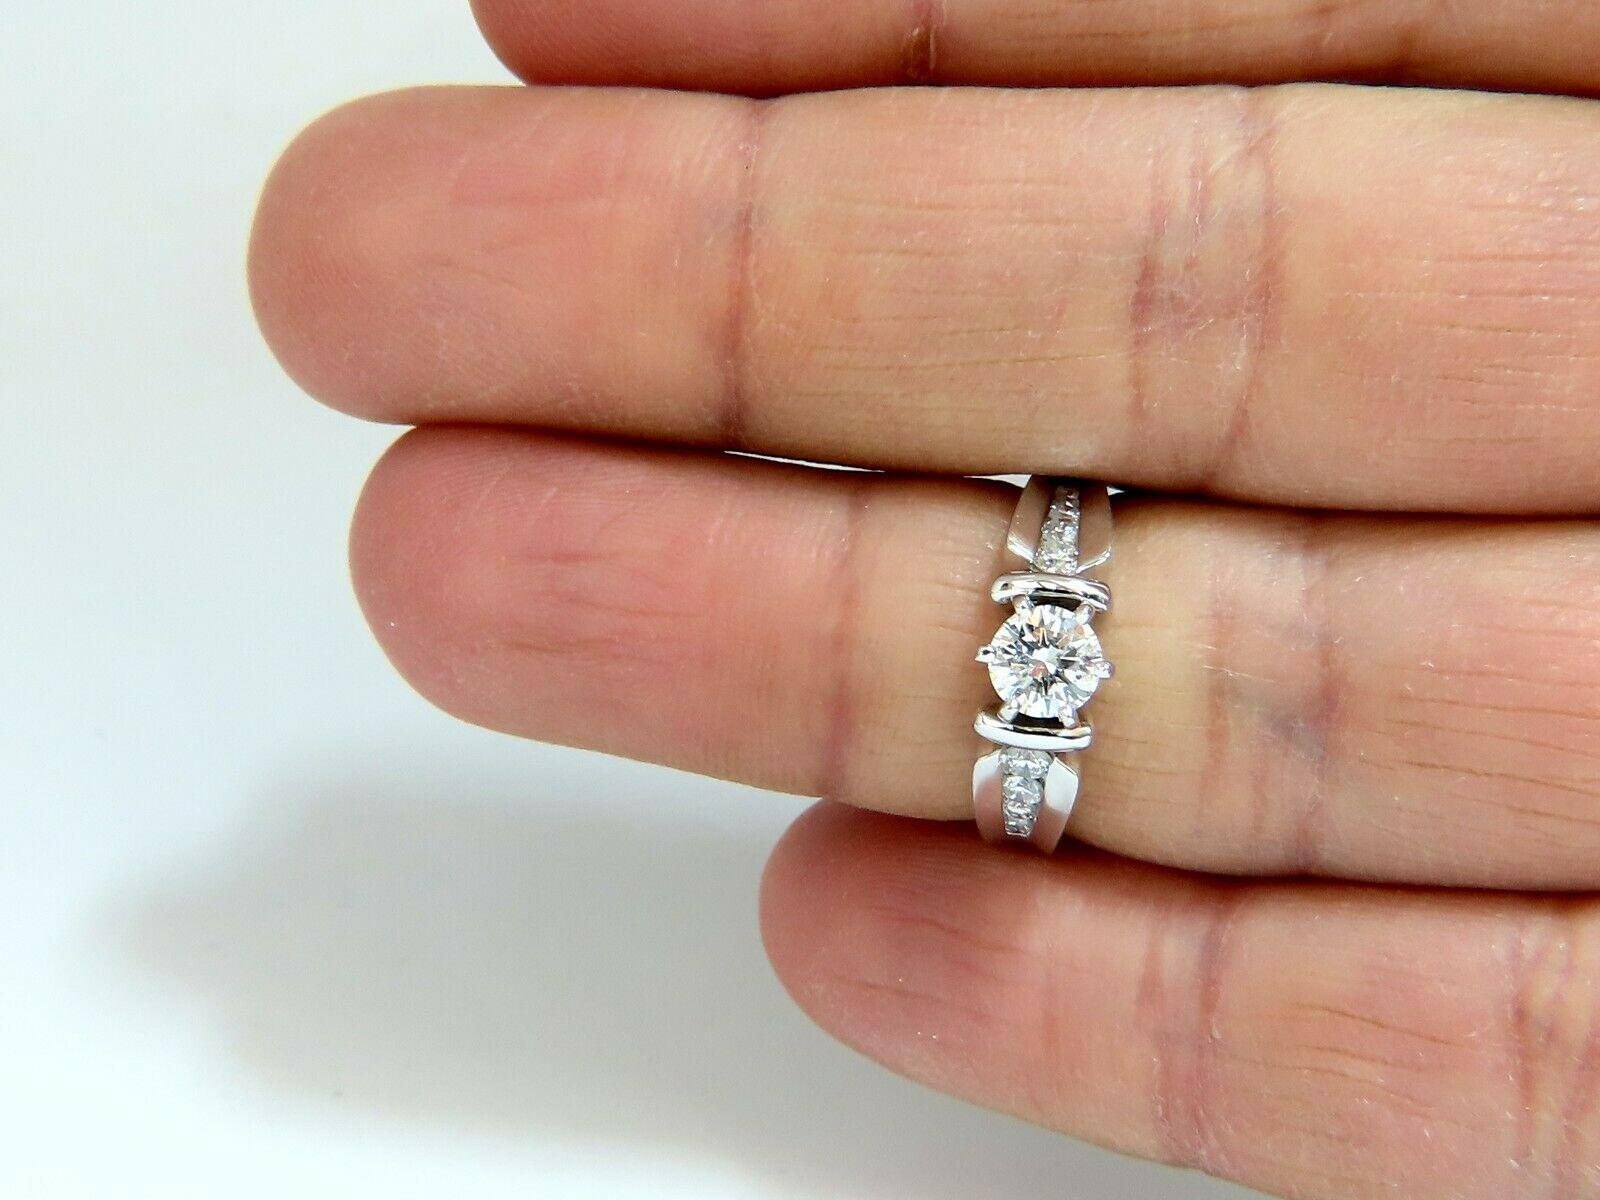 Traditional Engagement ring.

.47ct. round natural diamond

5.2mm diameter. 

I-color Si-1 clarity.

Side Diamonds: .40ct.

I -color Si-1 clarity.

14kt white gold 

5 grams.

current ring size: 6.5

We may resize, please inquire.

$6,700 Appraisal